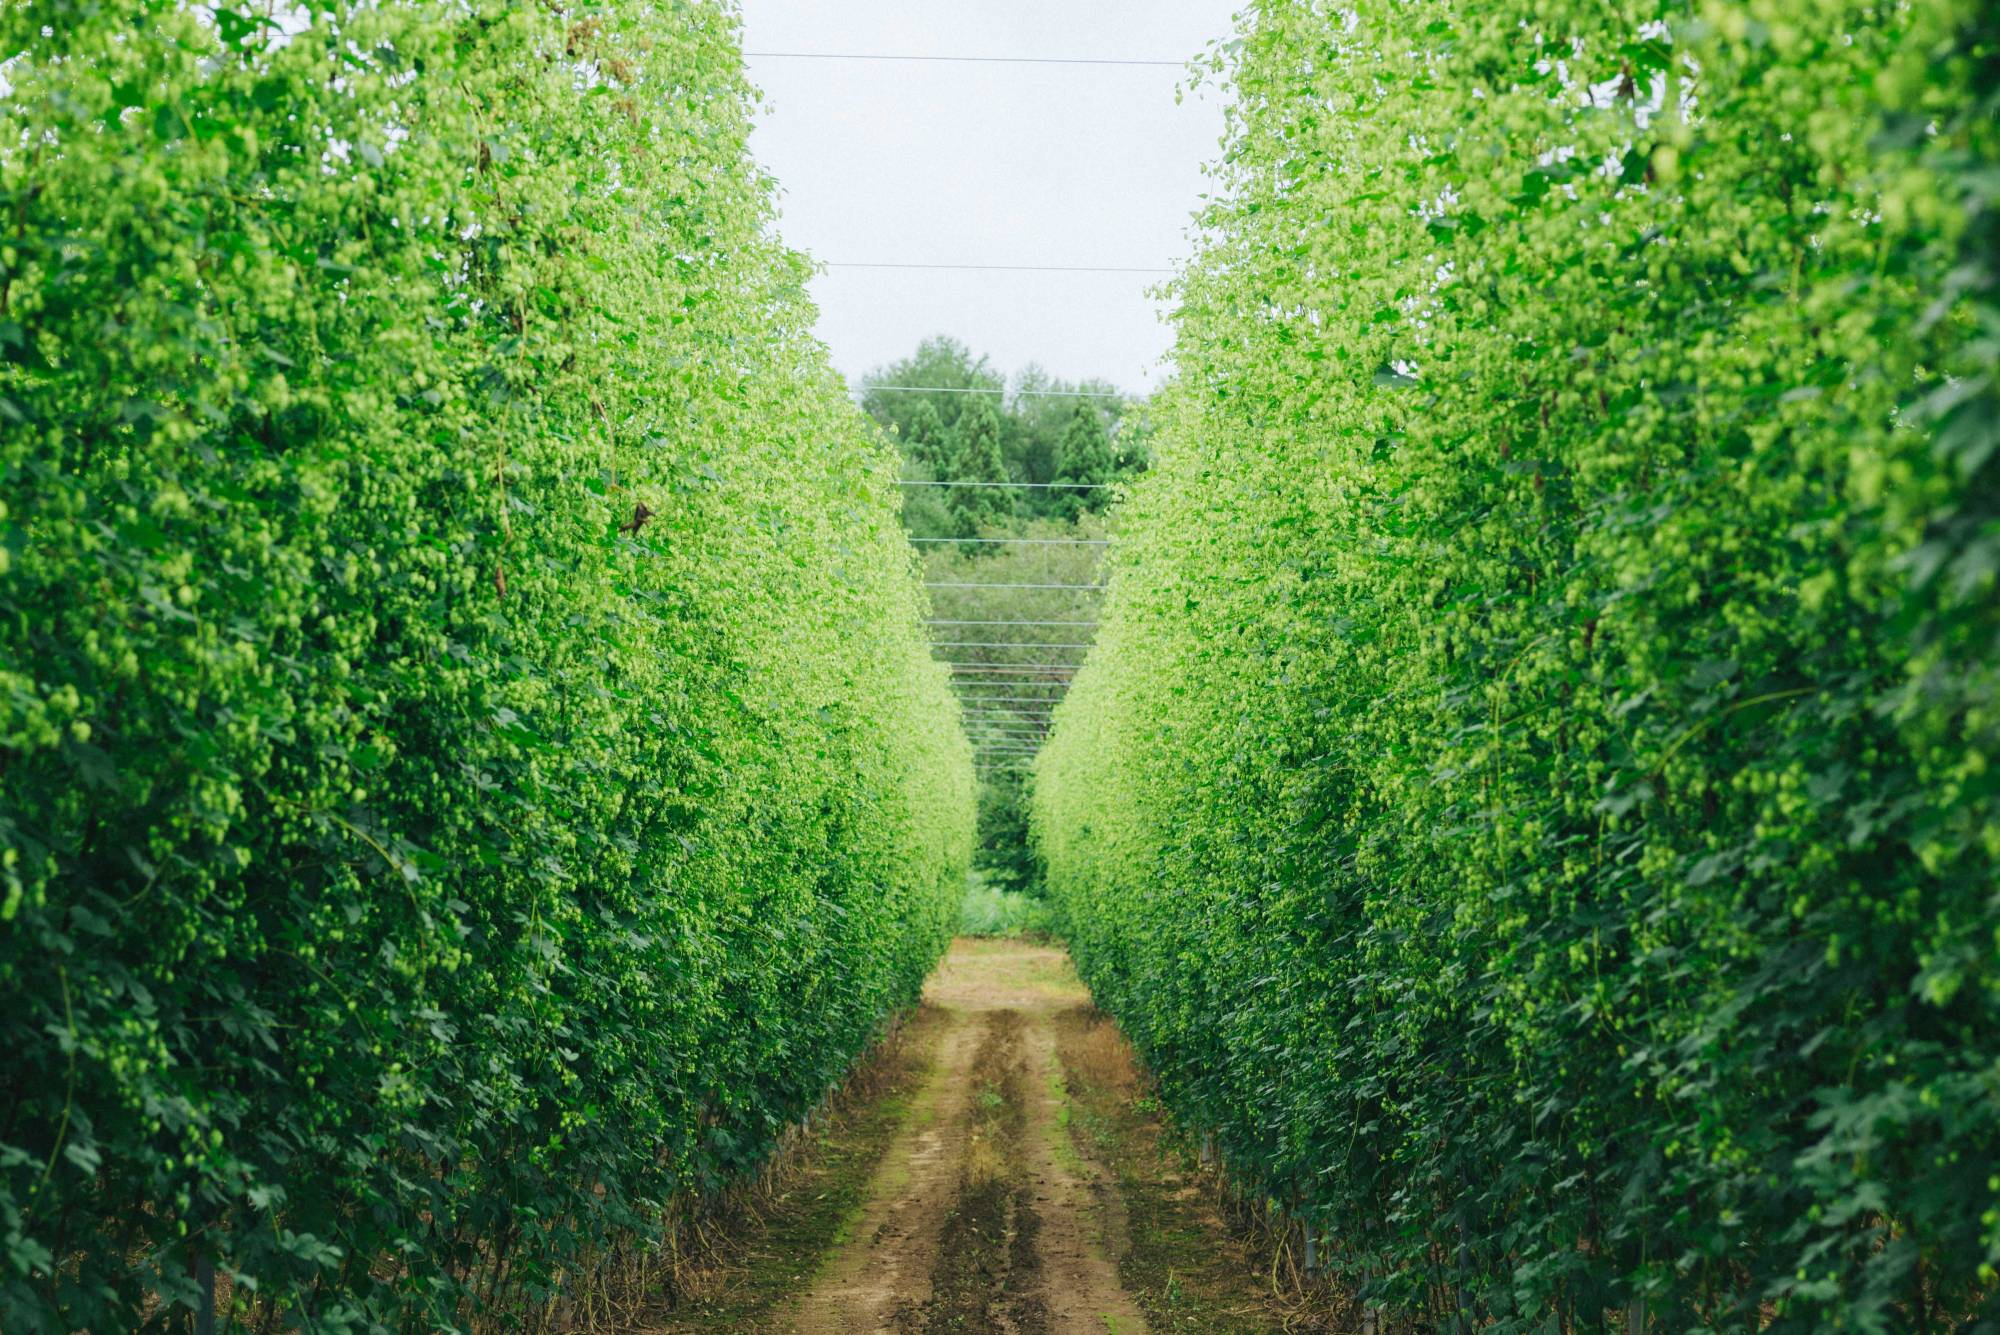 In addition to the usual tastings and tours, Tono Beer Experience tempts travelers with offers such as picnics under the leafy trellises of full-grown hop vines. | KATSUSUKE NISHINA